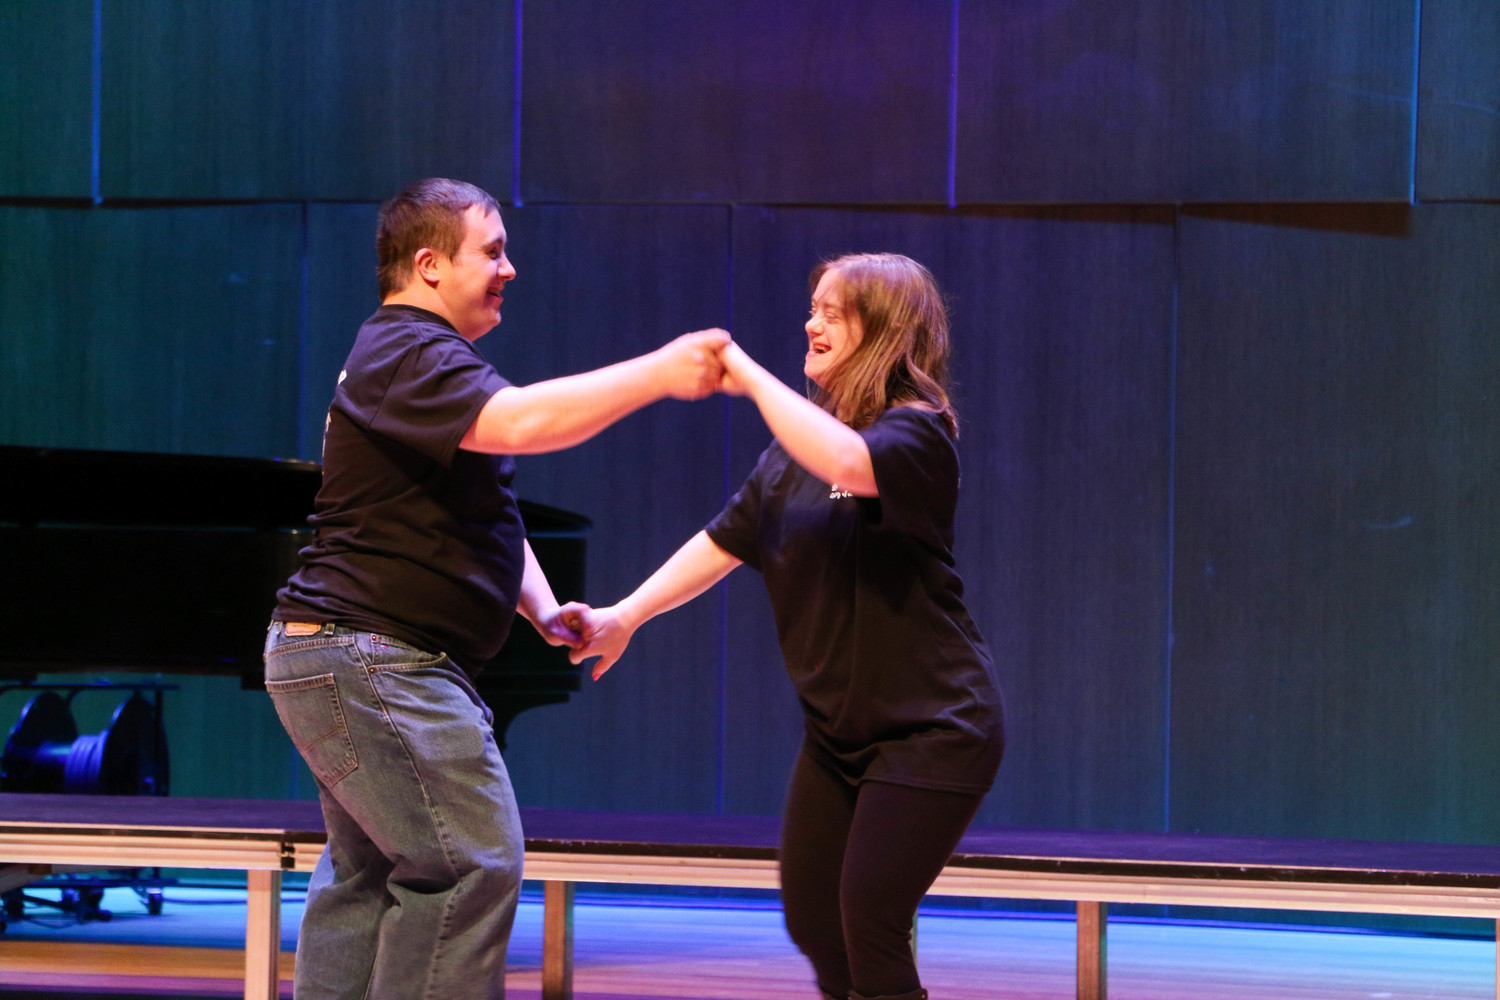 Tommy Gillece and Caitlin Wilkenshoff danced to “Footloose” during a Unity Through Diversity event at Molloy College on March 28. The evening featured performances and artwork from members of Rockville Centre’s Backyard Players & Friends.